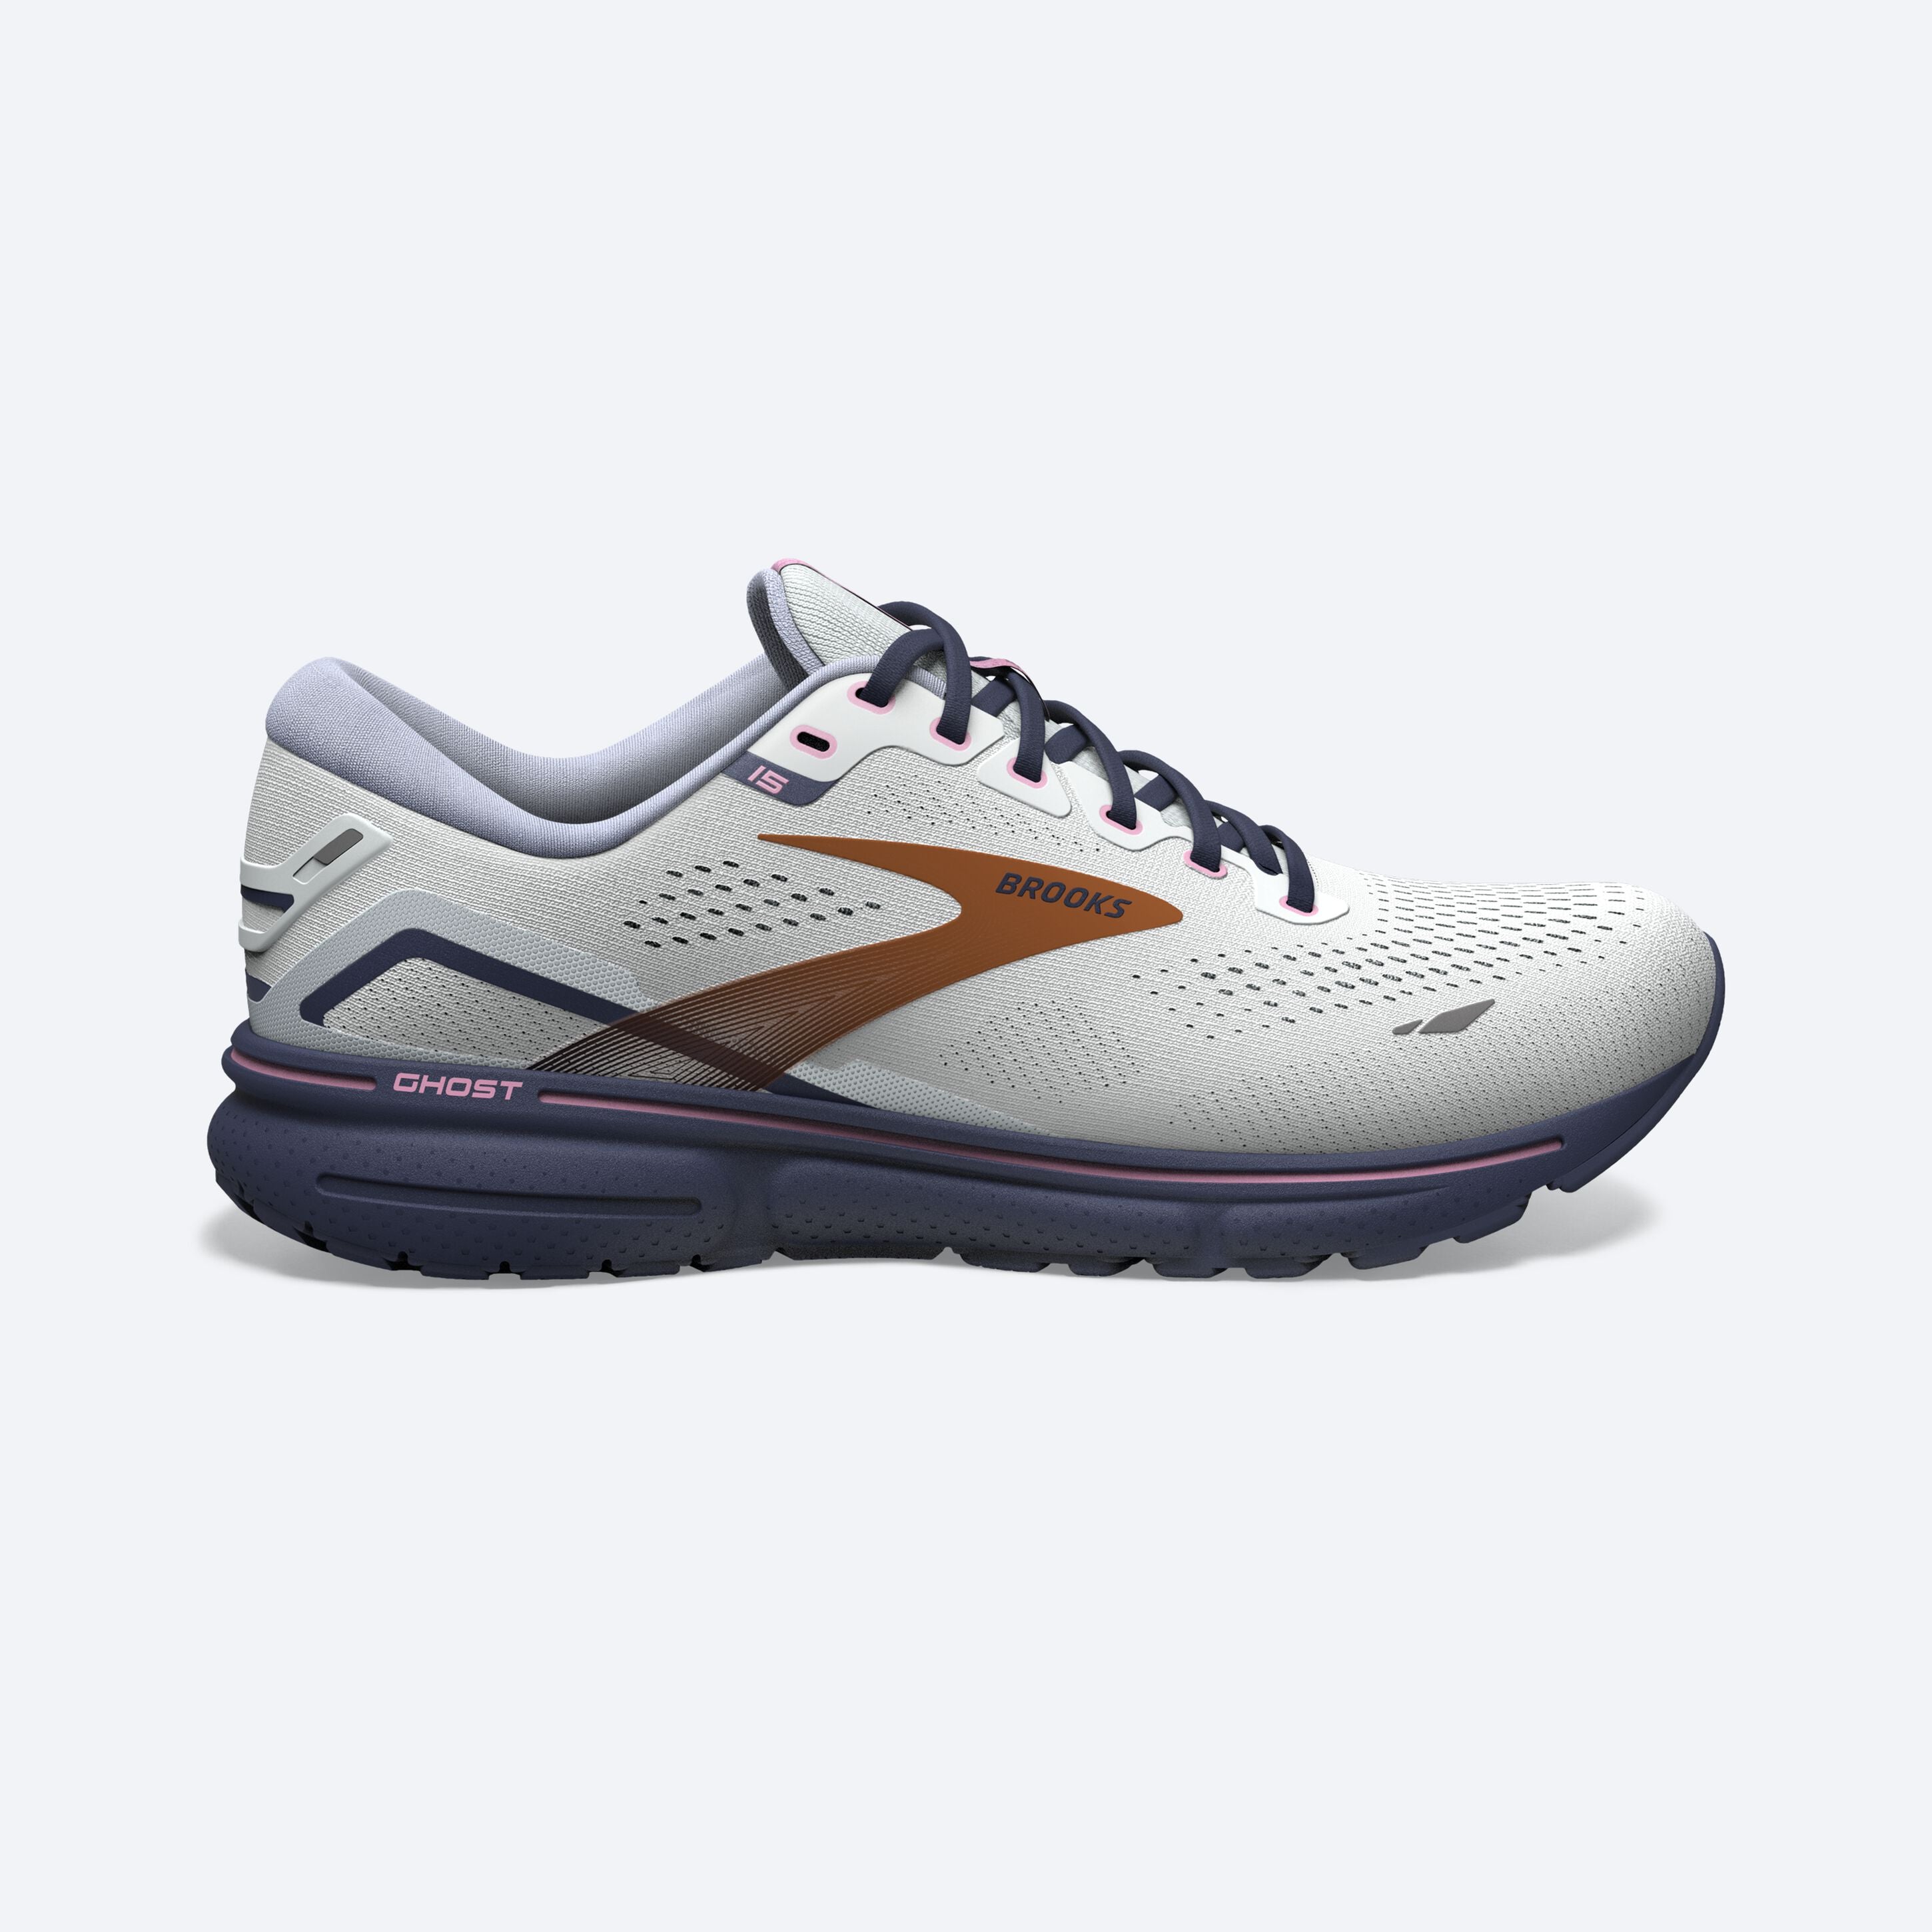 Lateral view of the Women's Ghost 15 by Brooks in the color Spa Blue/NeoPink/Copper